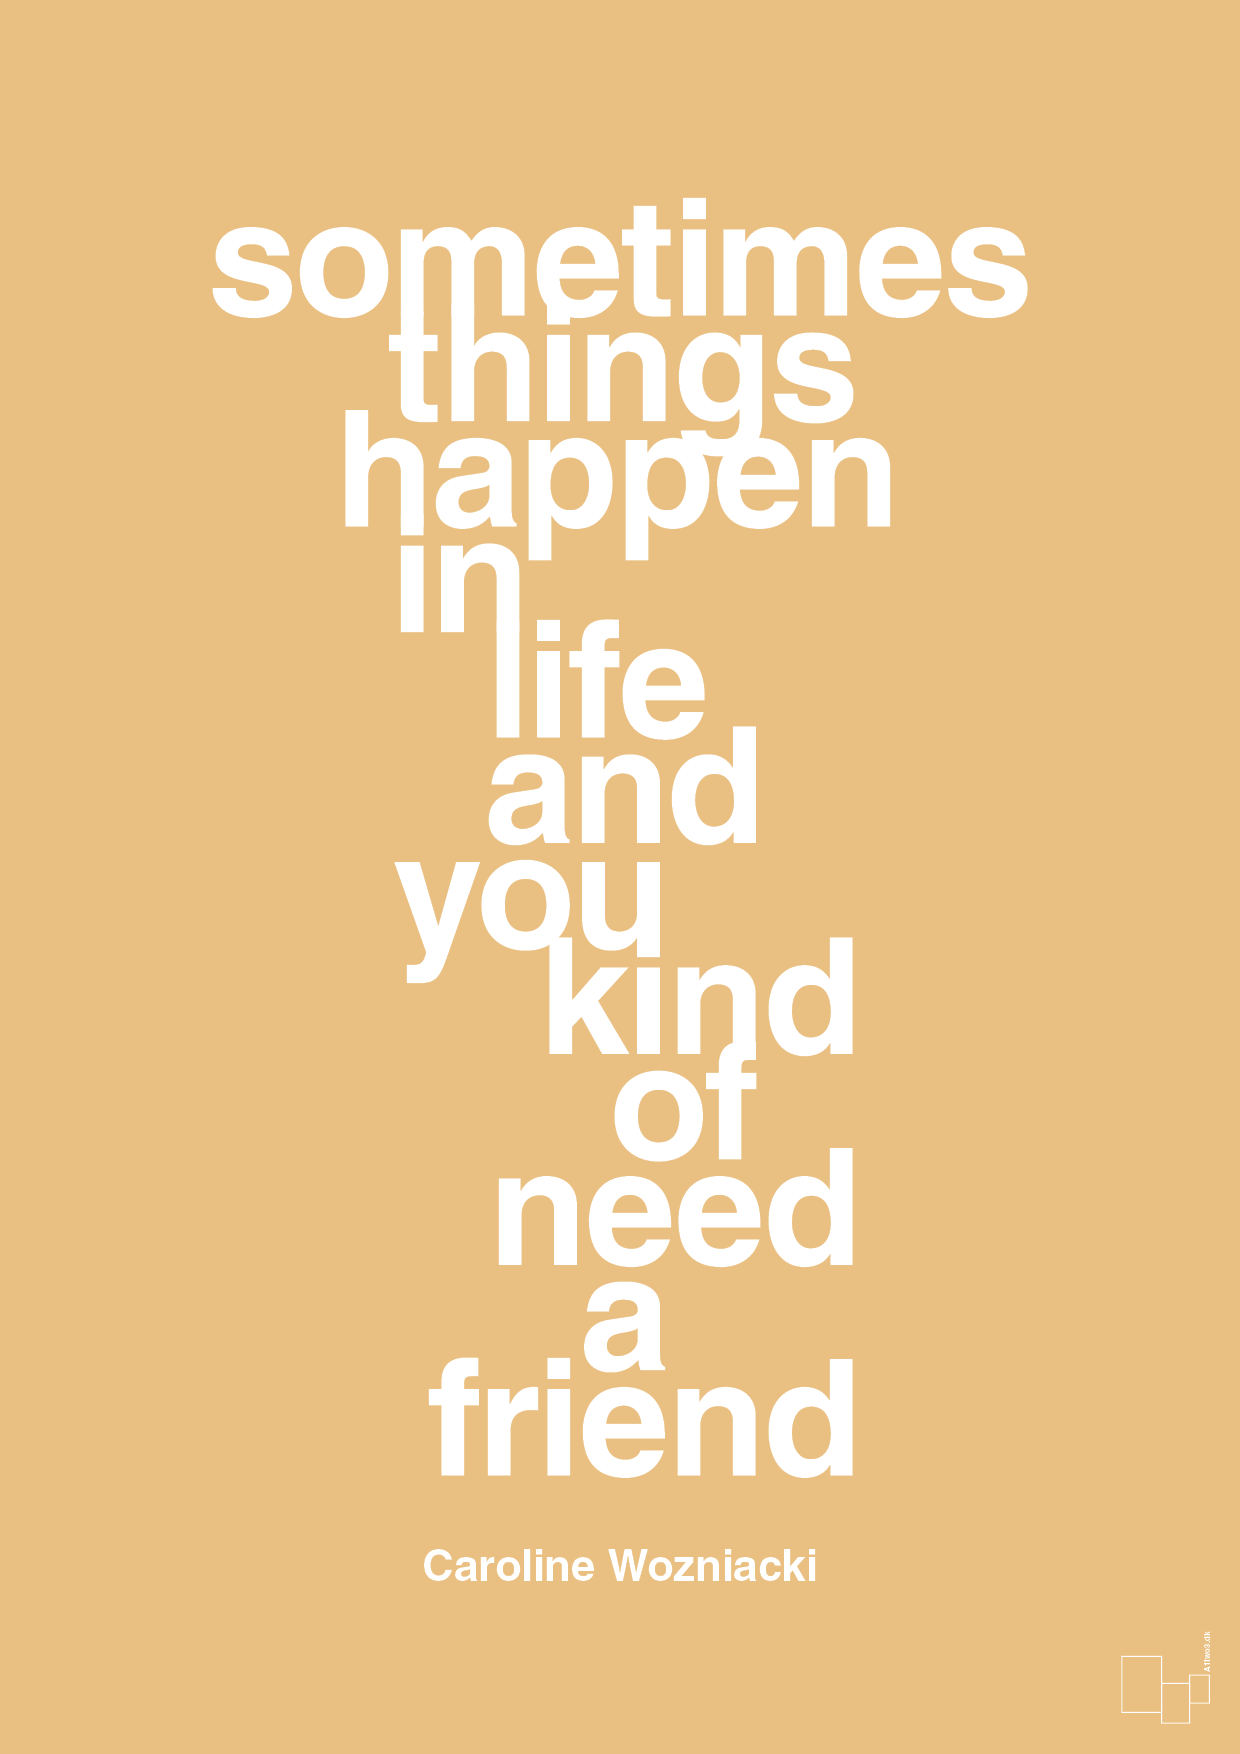 sometimes things happen in life and you kind of need a friend - Plakat med Citater i Charismatic